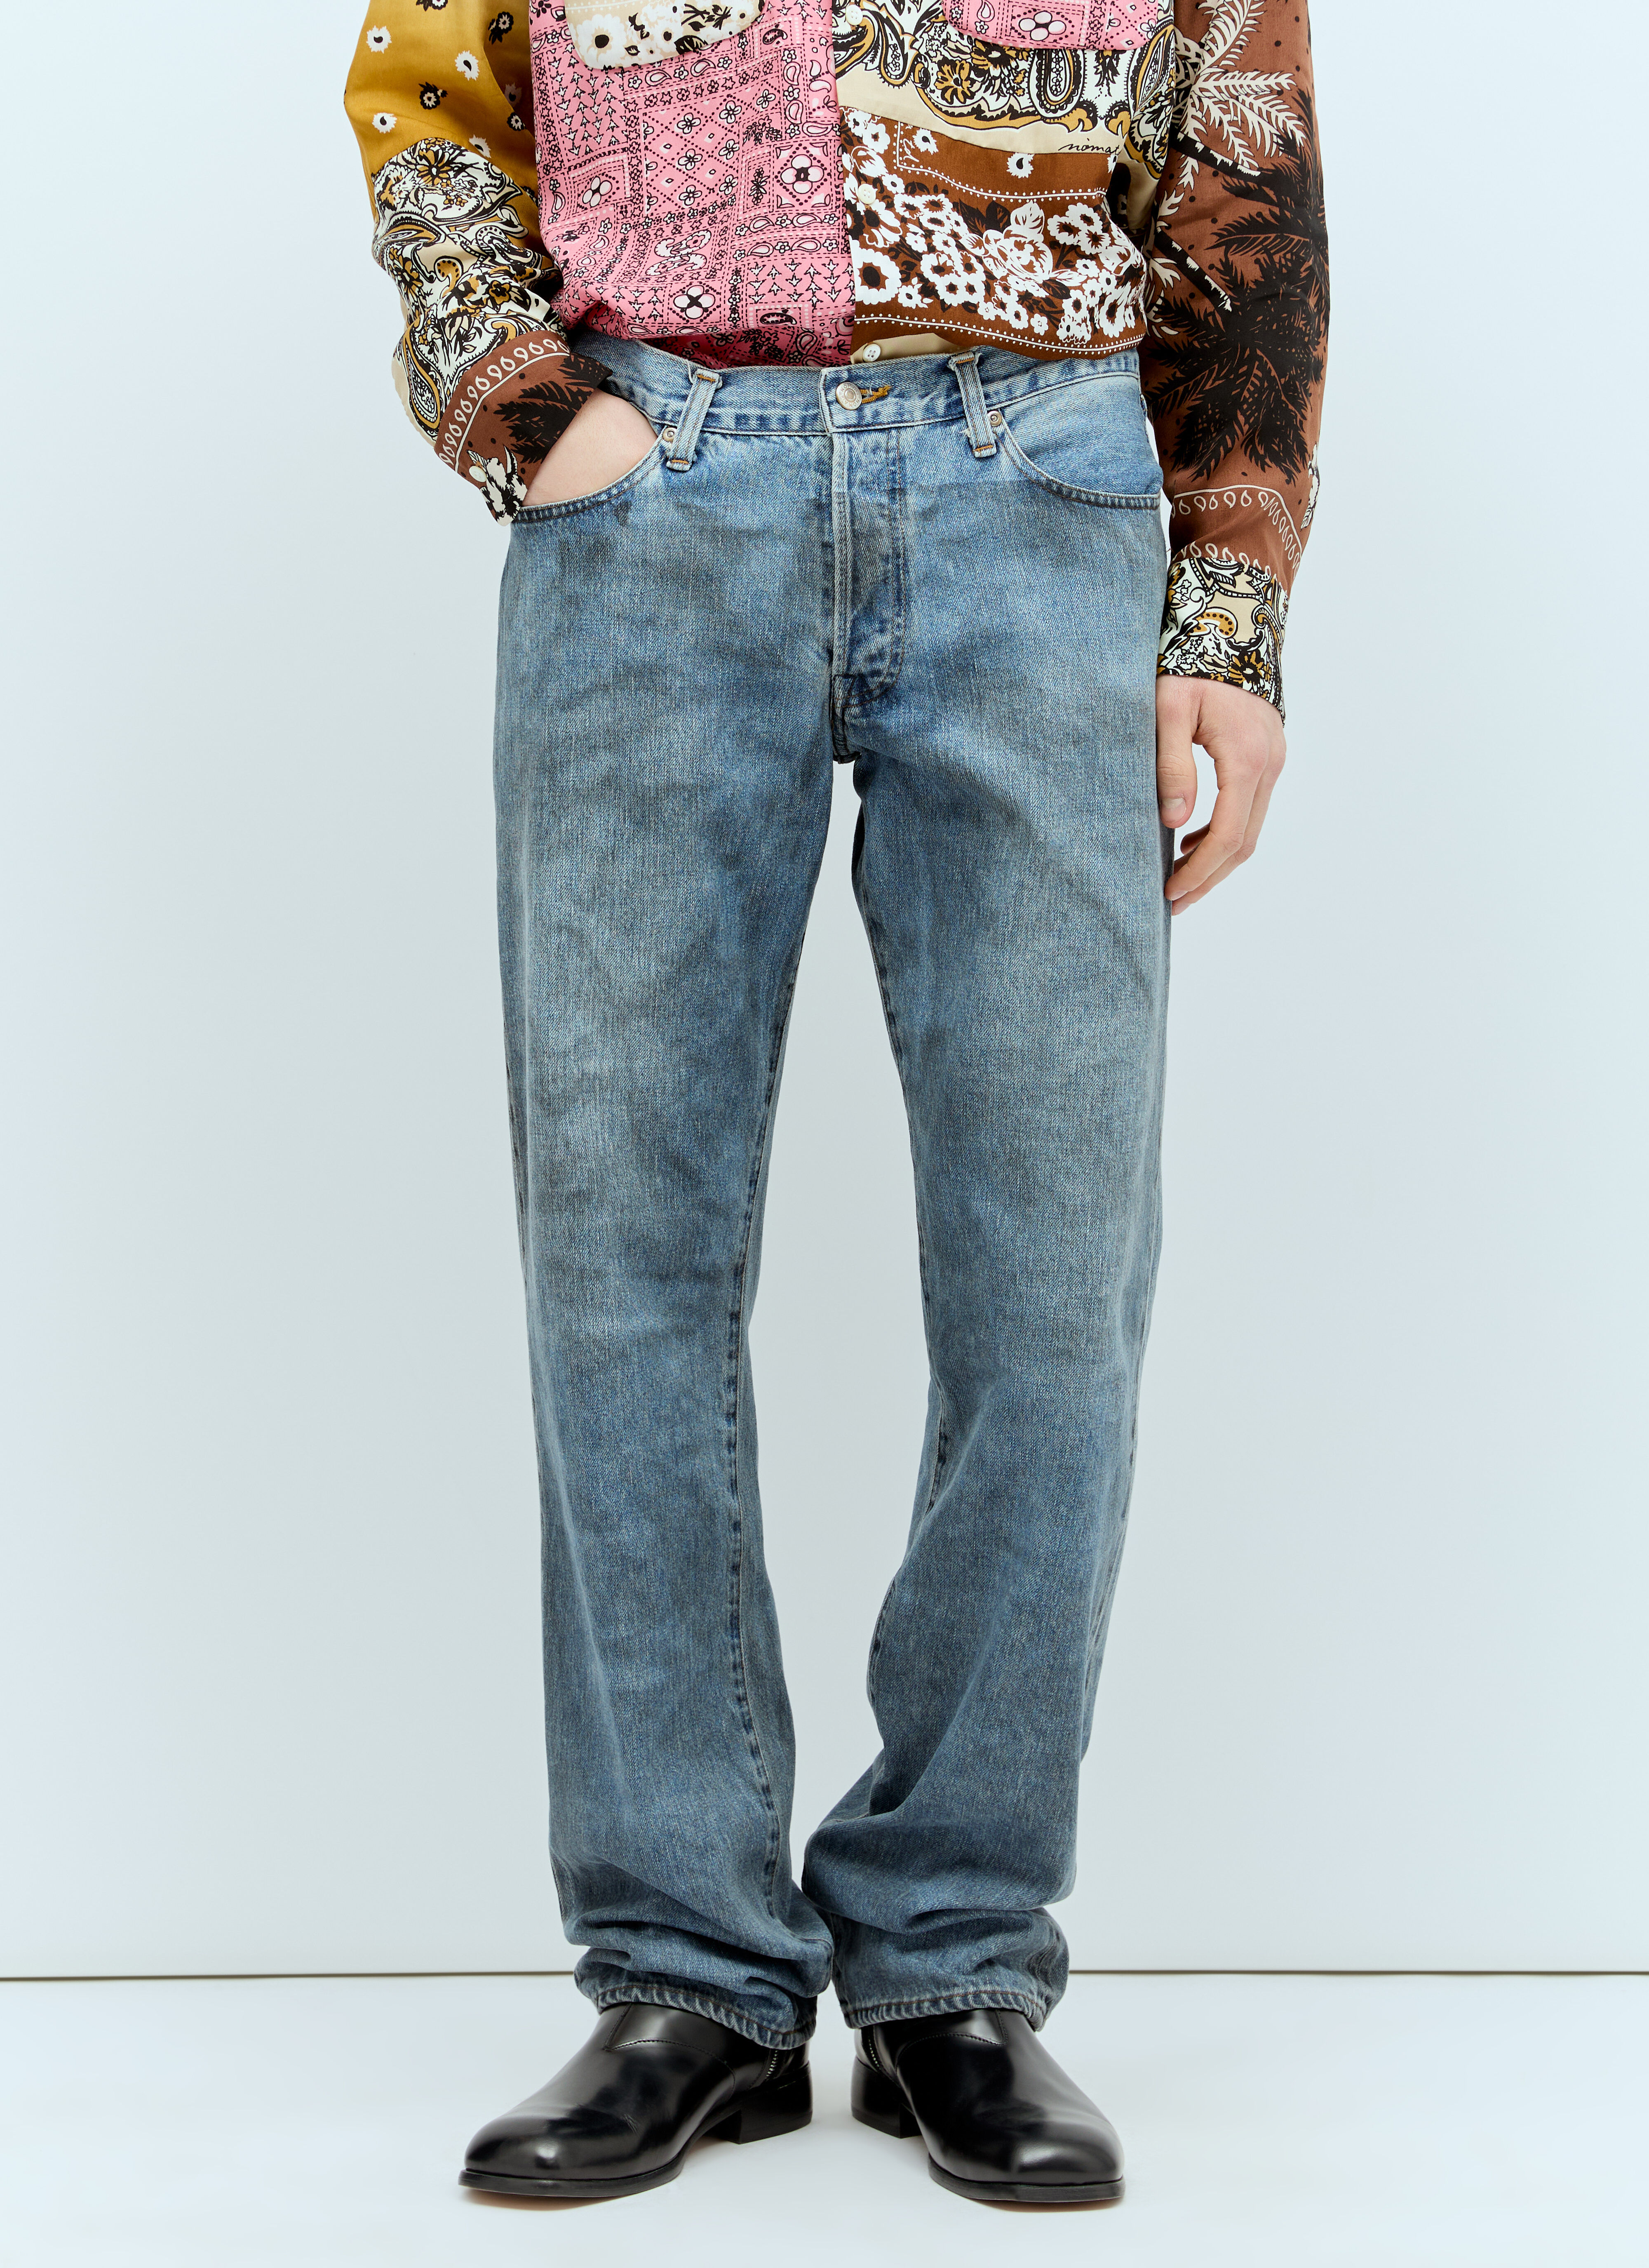 VETEMENTS Hand-Painted Finish Jeans Red vet0156010